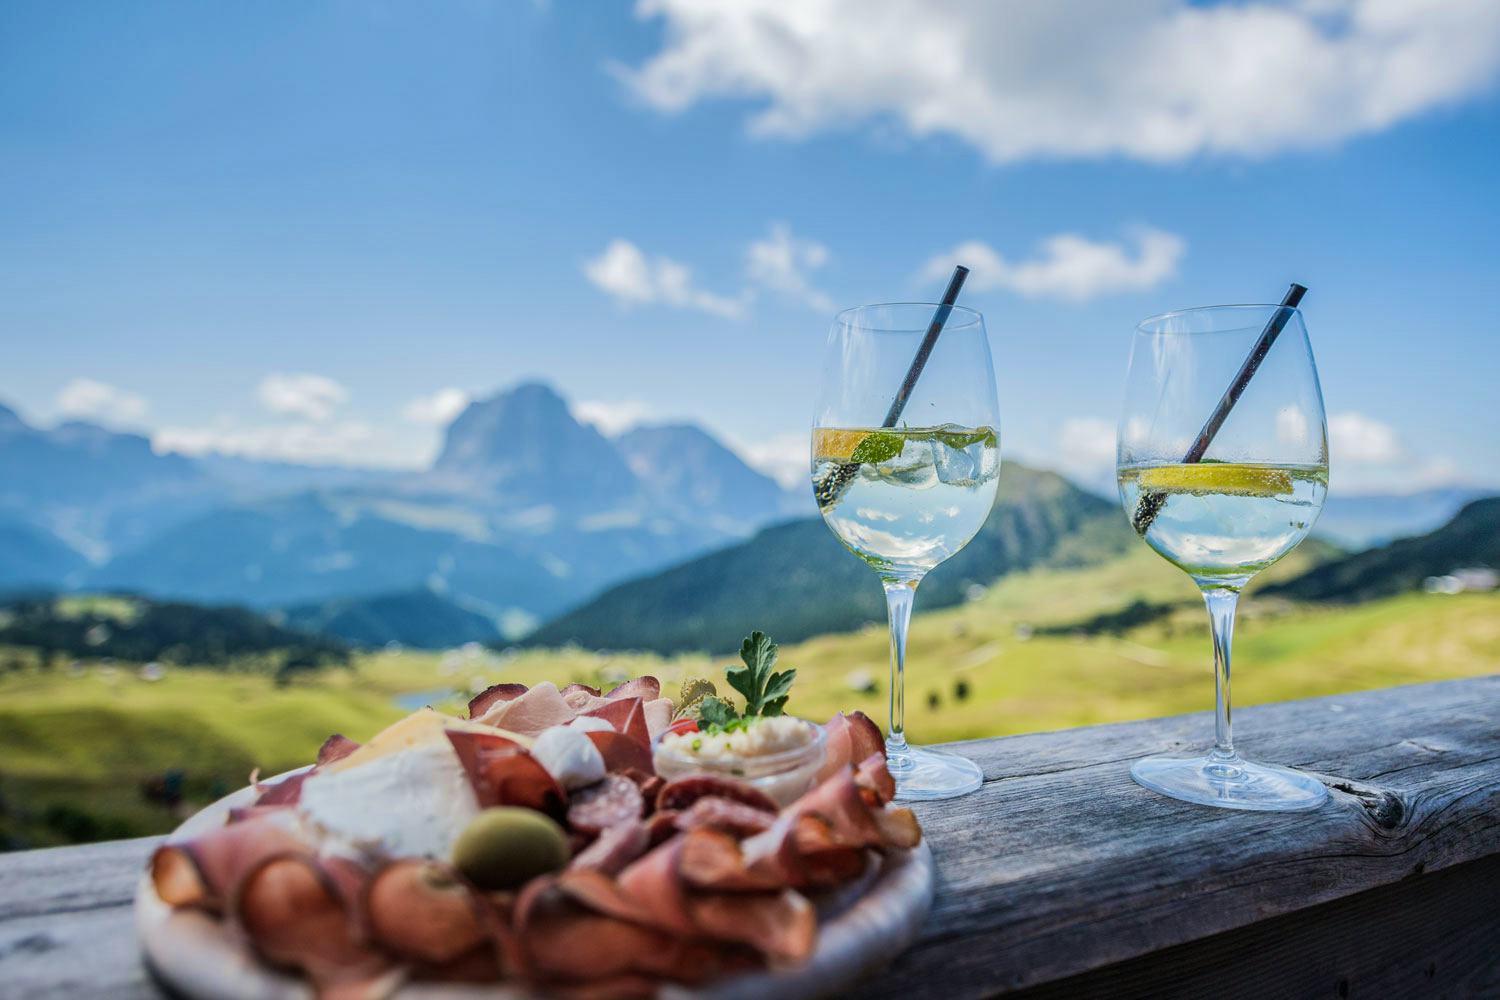 South Tyrol food plate with view in background